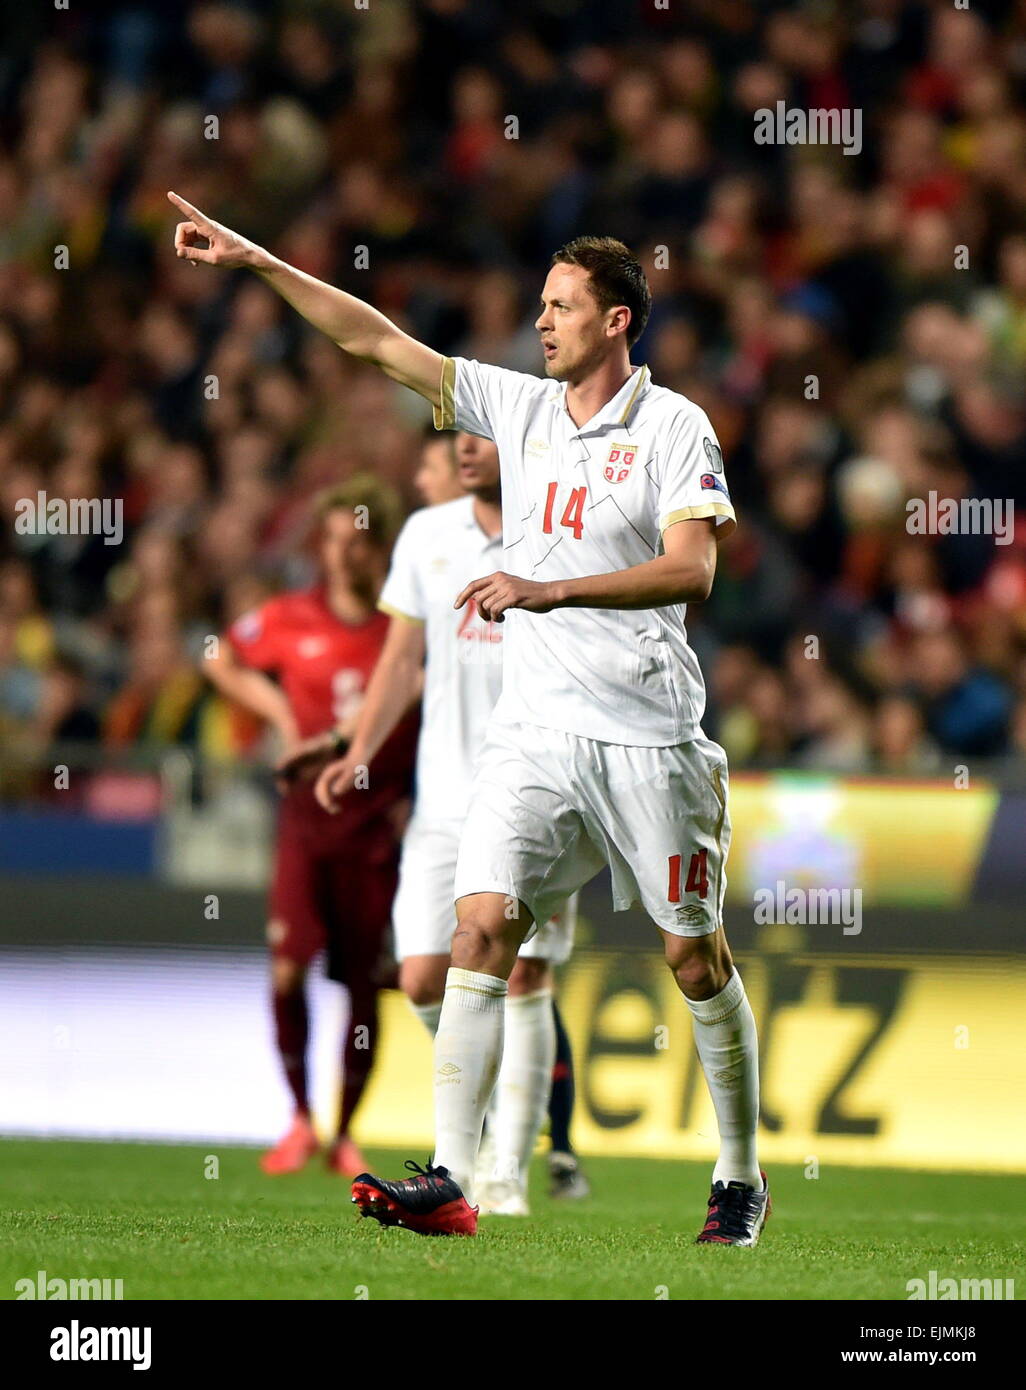 Lisbon, Portugal. 29th Mar, 2015. Nemanja Matic of Serbia celebrates his goal during the UEFA Euro 2016 Group I qualifying match against Portugal in Lisbon, Portugal, March 29, 2015. Serbia lost 1-2. Credit:  Zhang Liyun/Xinhua/Alamy Live News Stock Photo